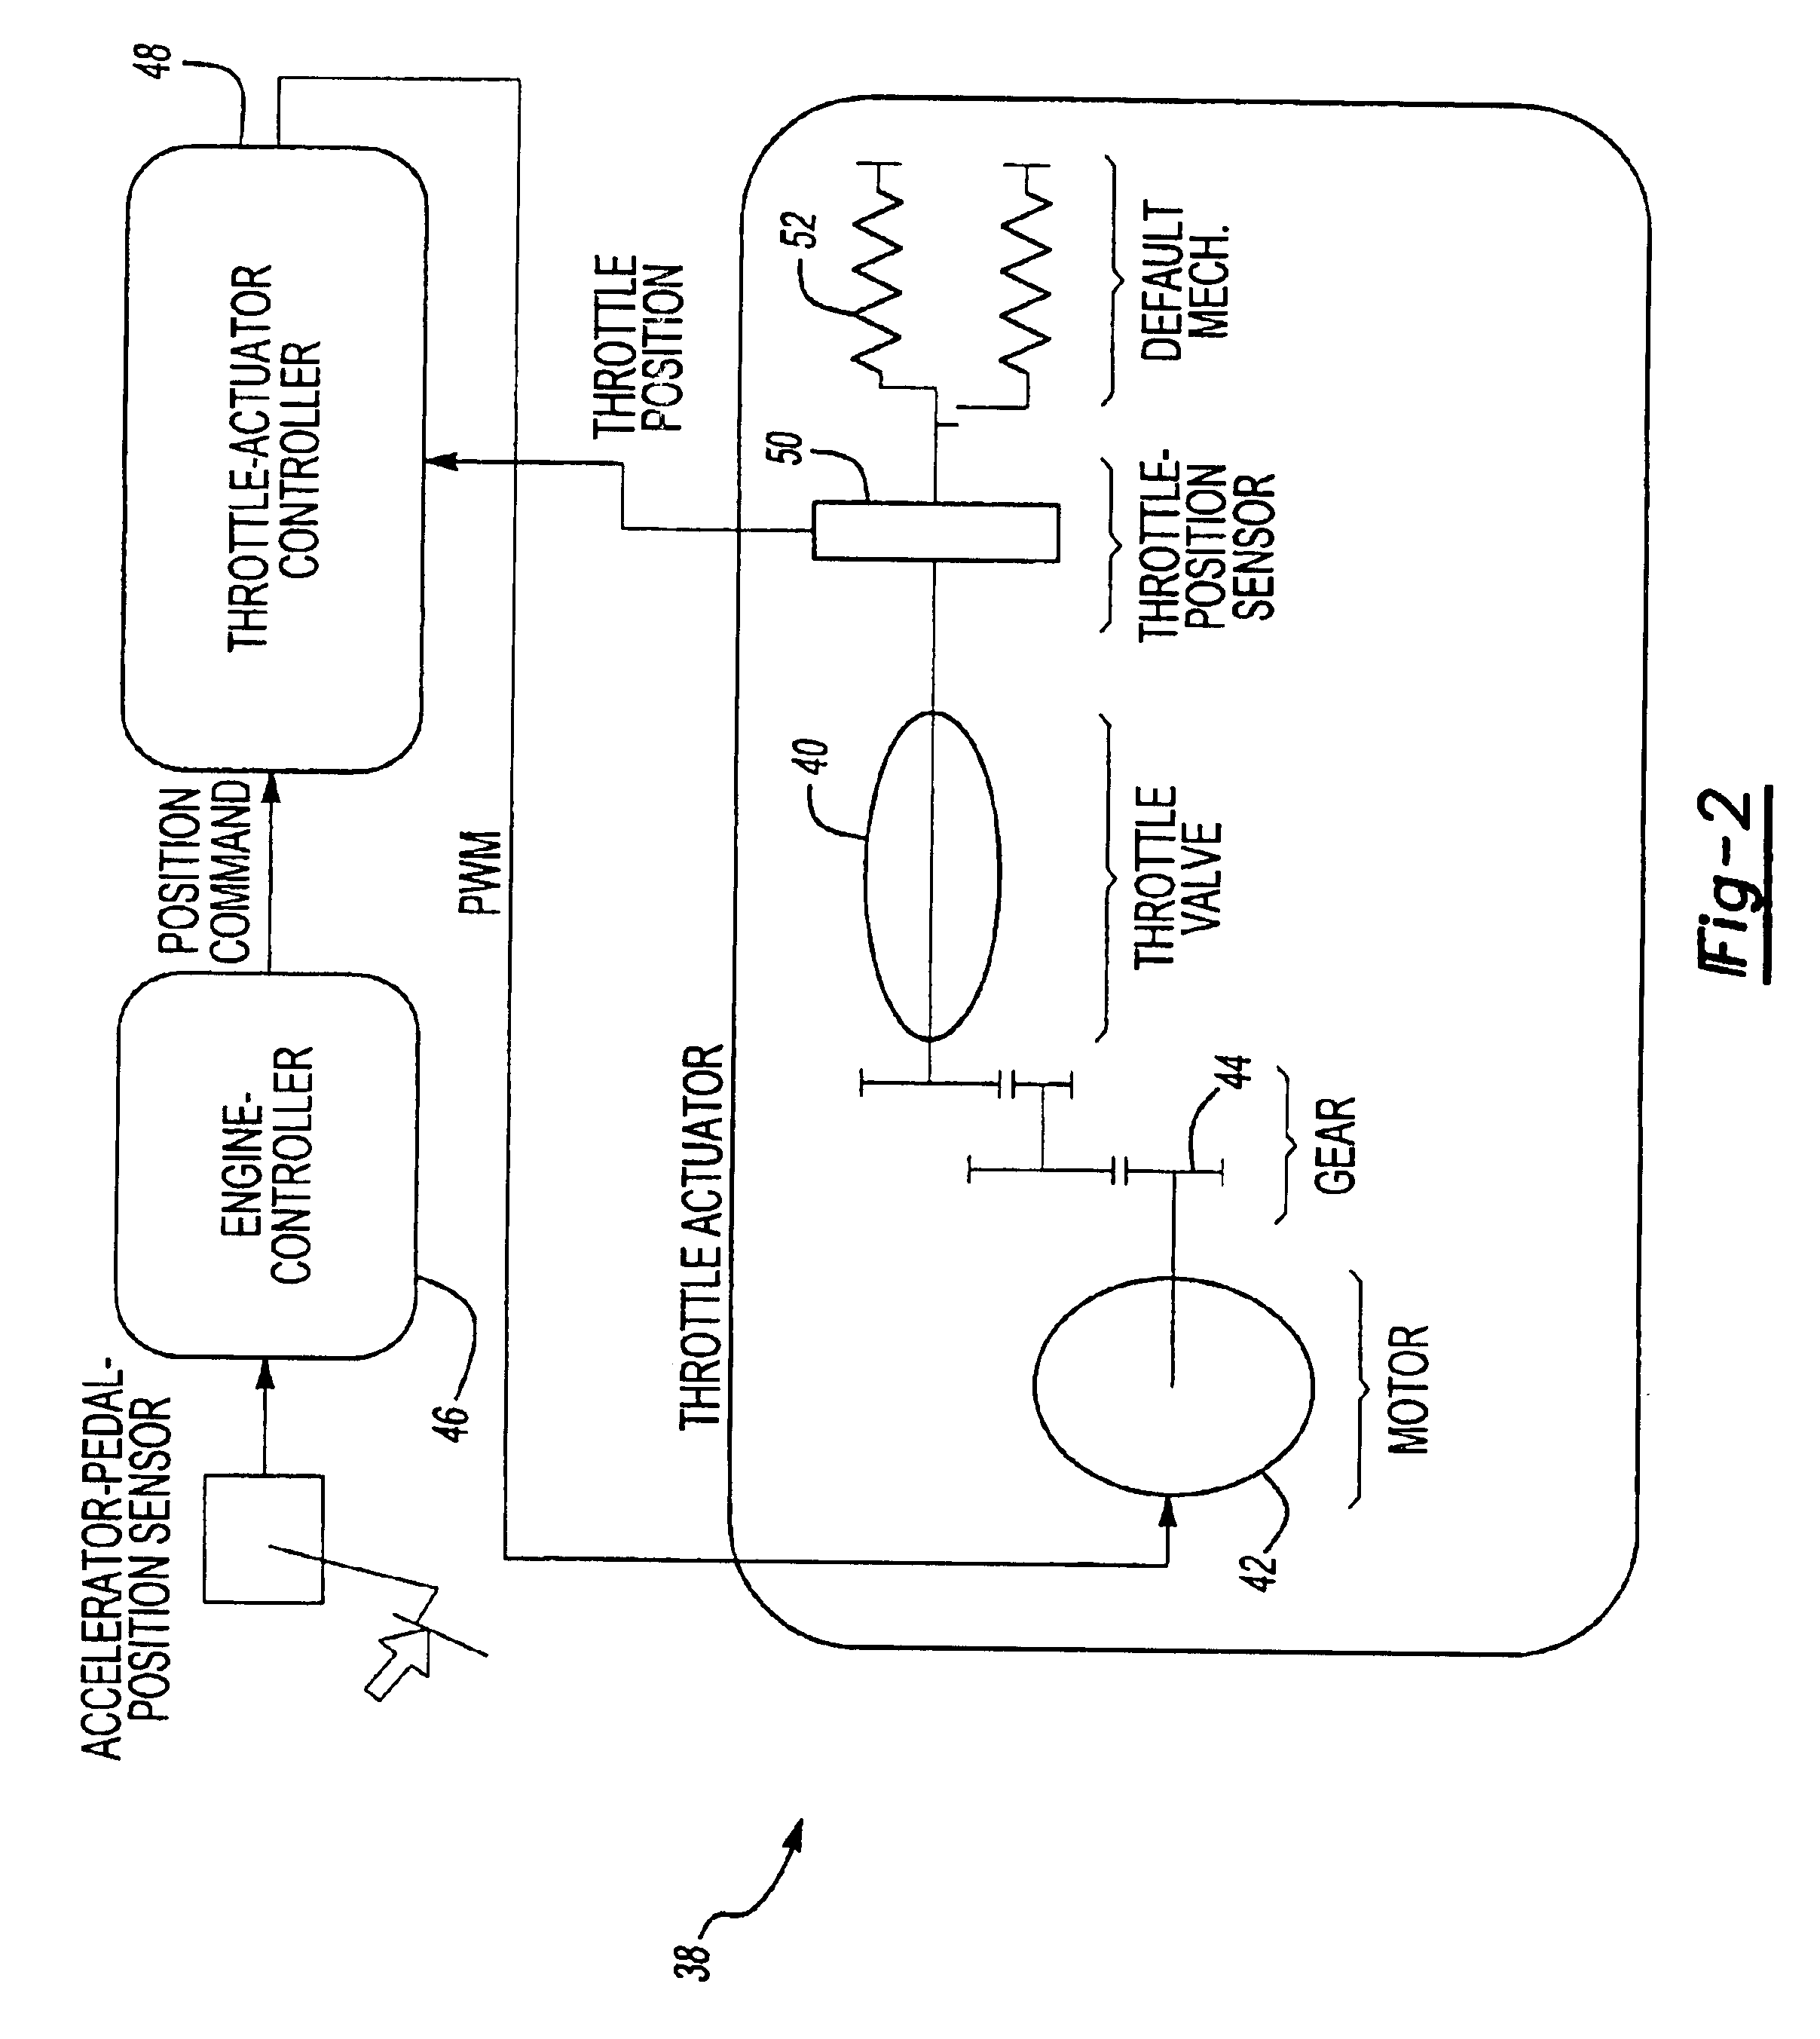 Fuel delivery system for an internal combustion engine